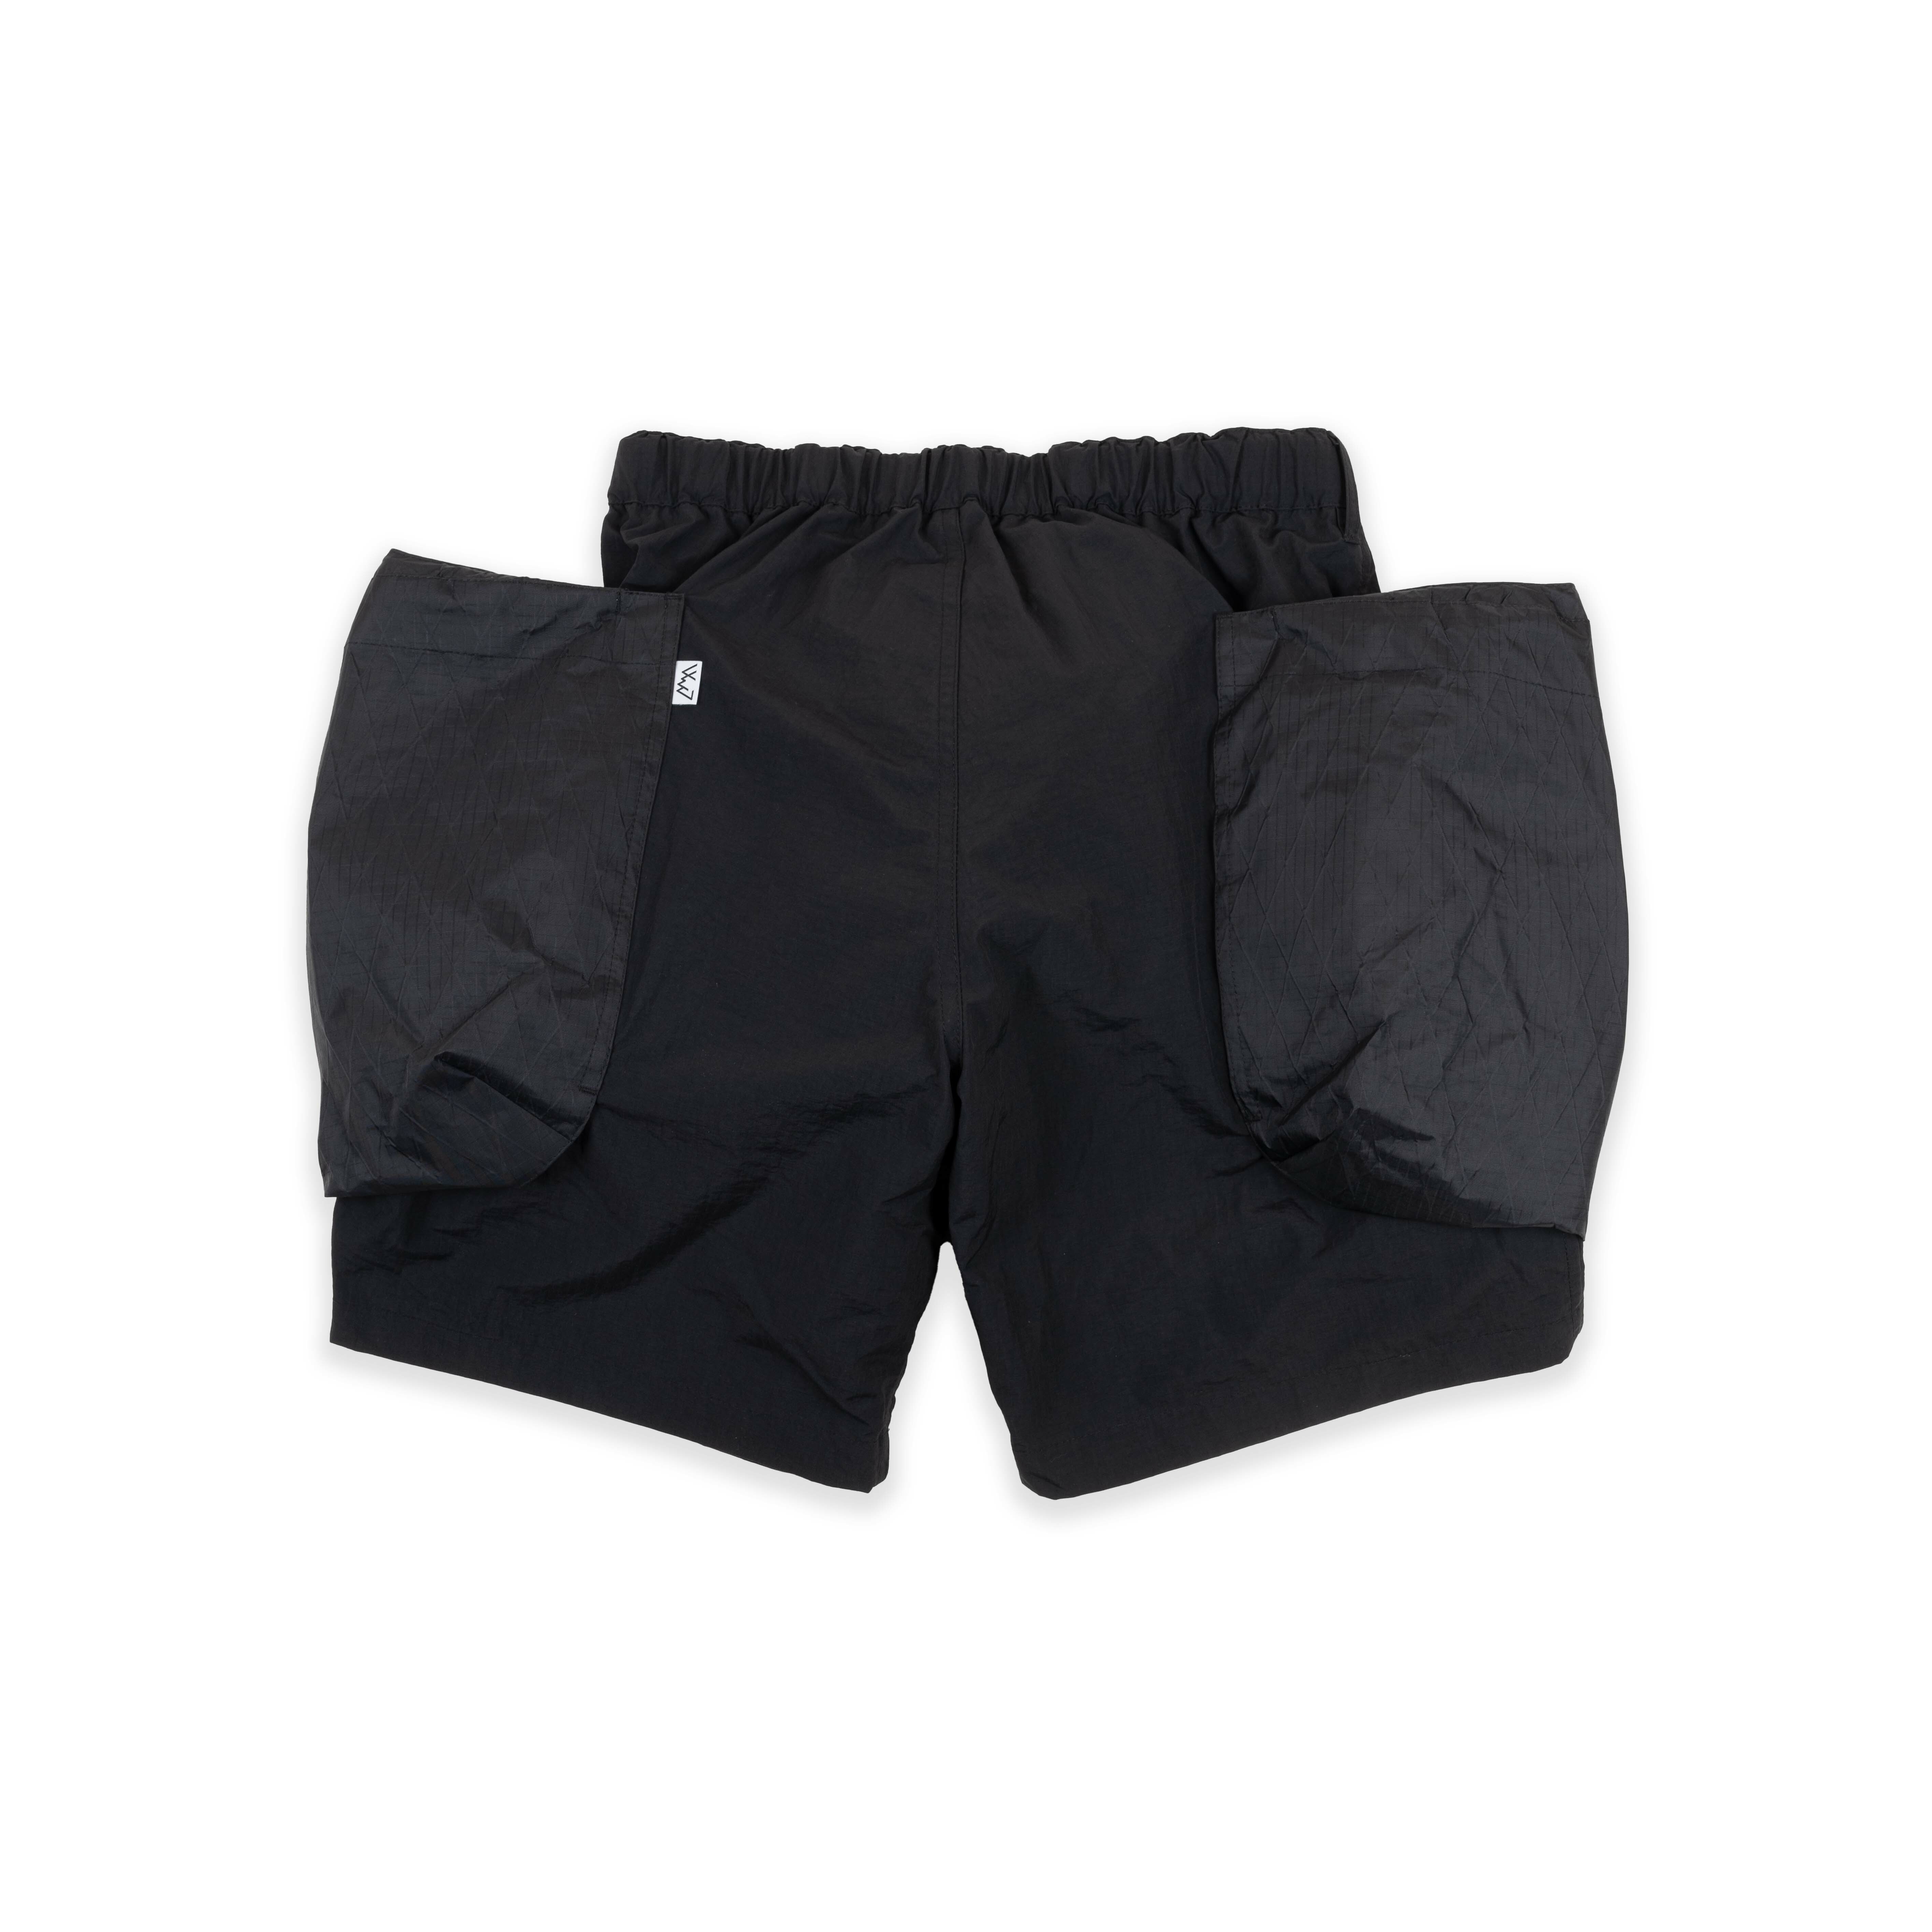 CMF OUTDOOR GARMENT For 432Hz ACTIVITY SHORTS CMF2102-4